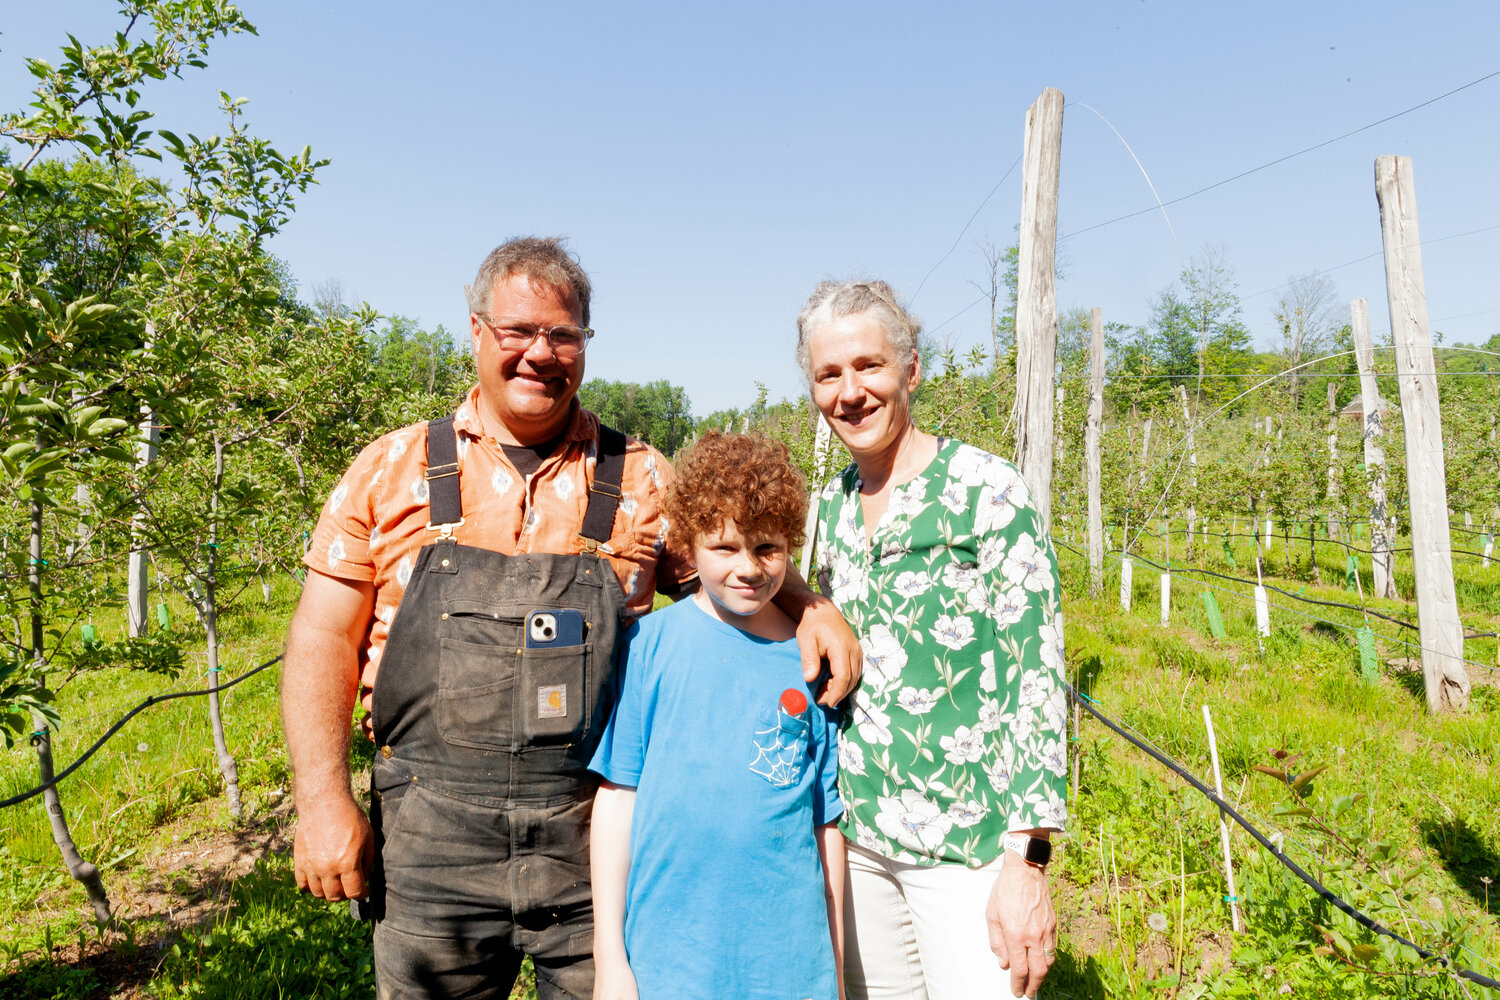 Brett Budde, with his wife and business partner Sara (right), along with their son, Rocket, operate Majestic Farm, an organic apple orchard and livestock farm in Mountaindale. They face the daunting task of recovering from the damage inflicted on their crop by a recent spring freeze.